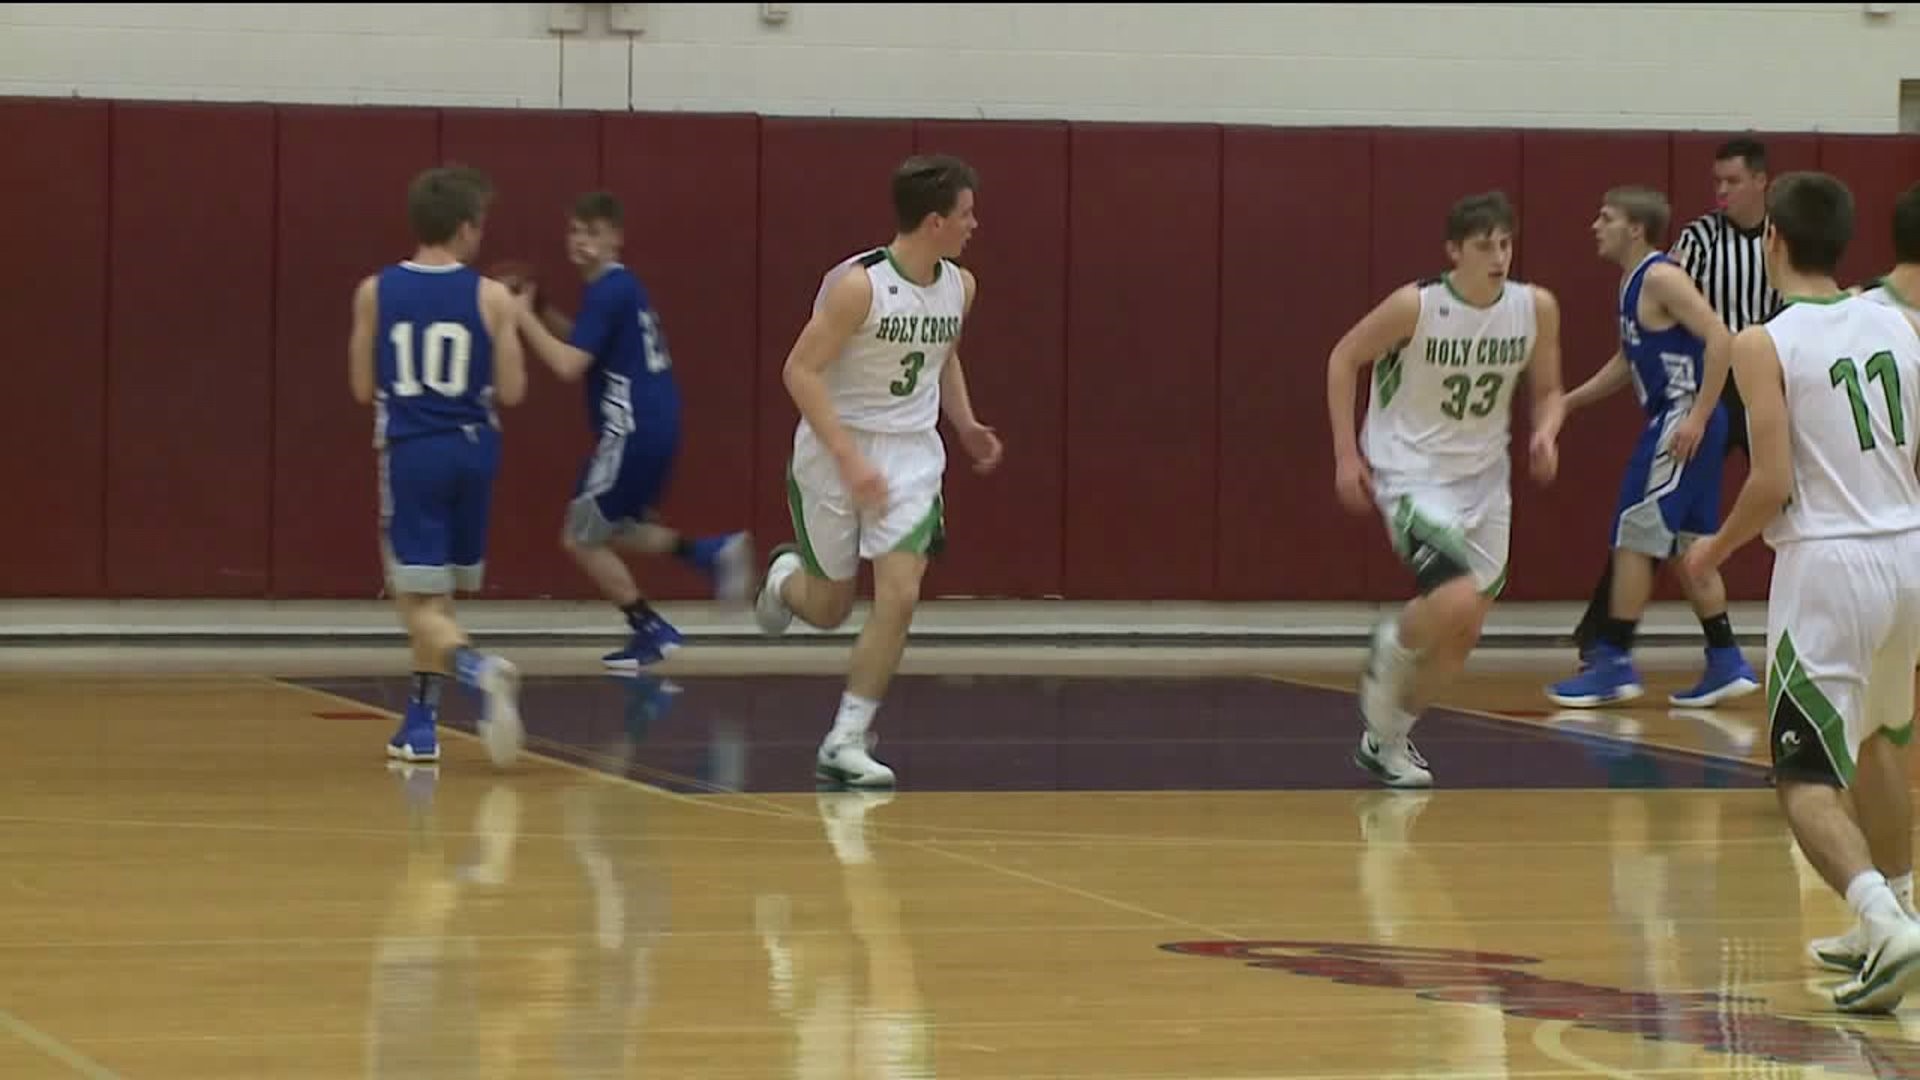 Holy Cross Boys Beat Mid Valley in Lackawanna League First Half Title